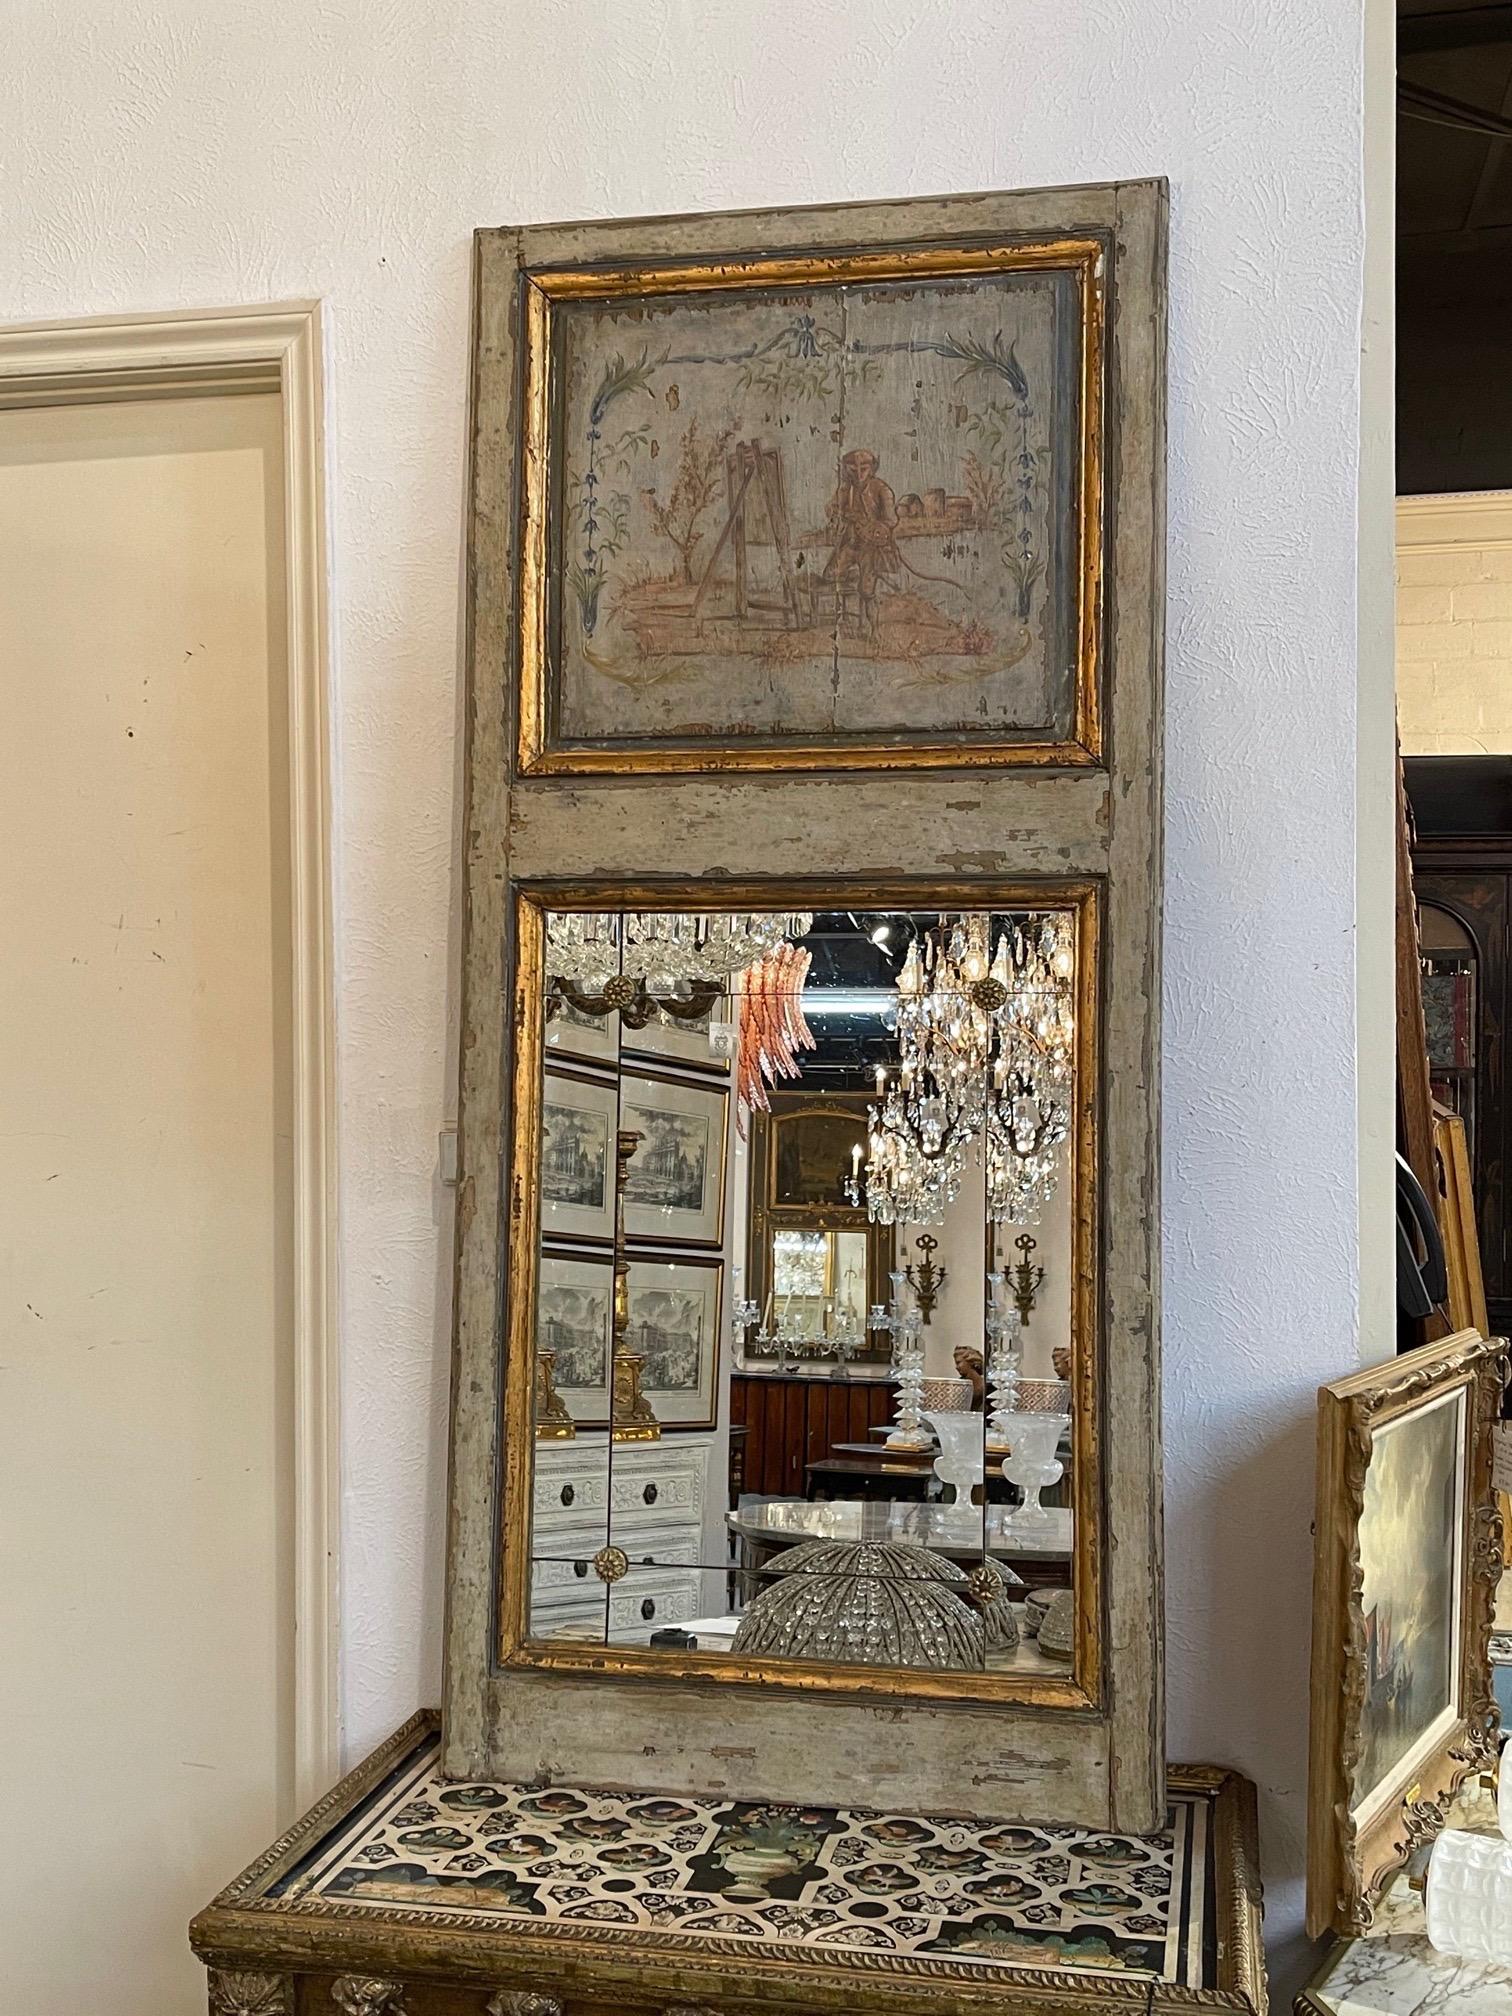 Lovely 19th century French painted Trumeau mirror featuring a painted scene with monkeys. Also note the divided mirror sections. An interesting accessory!